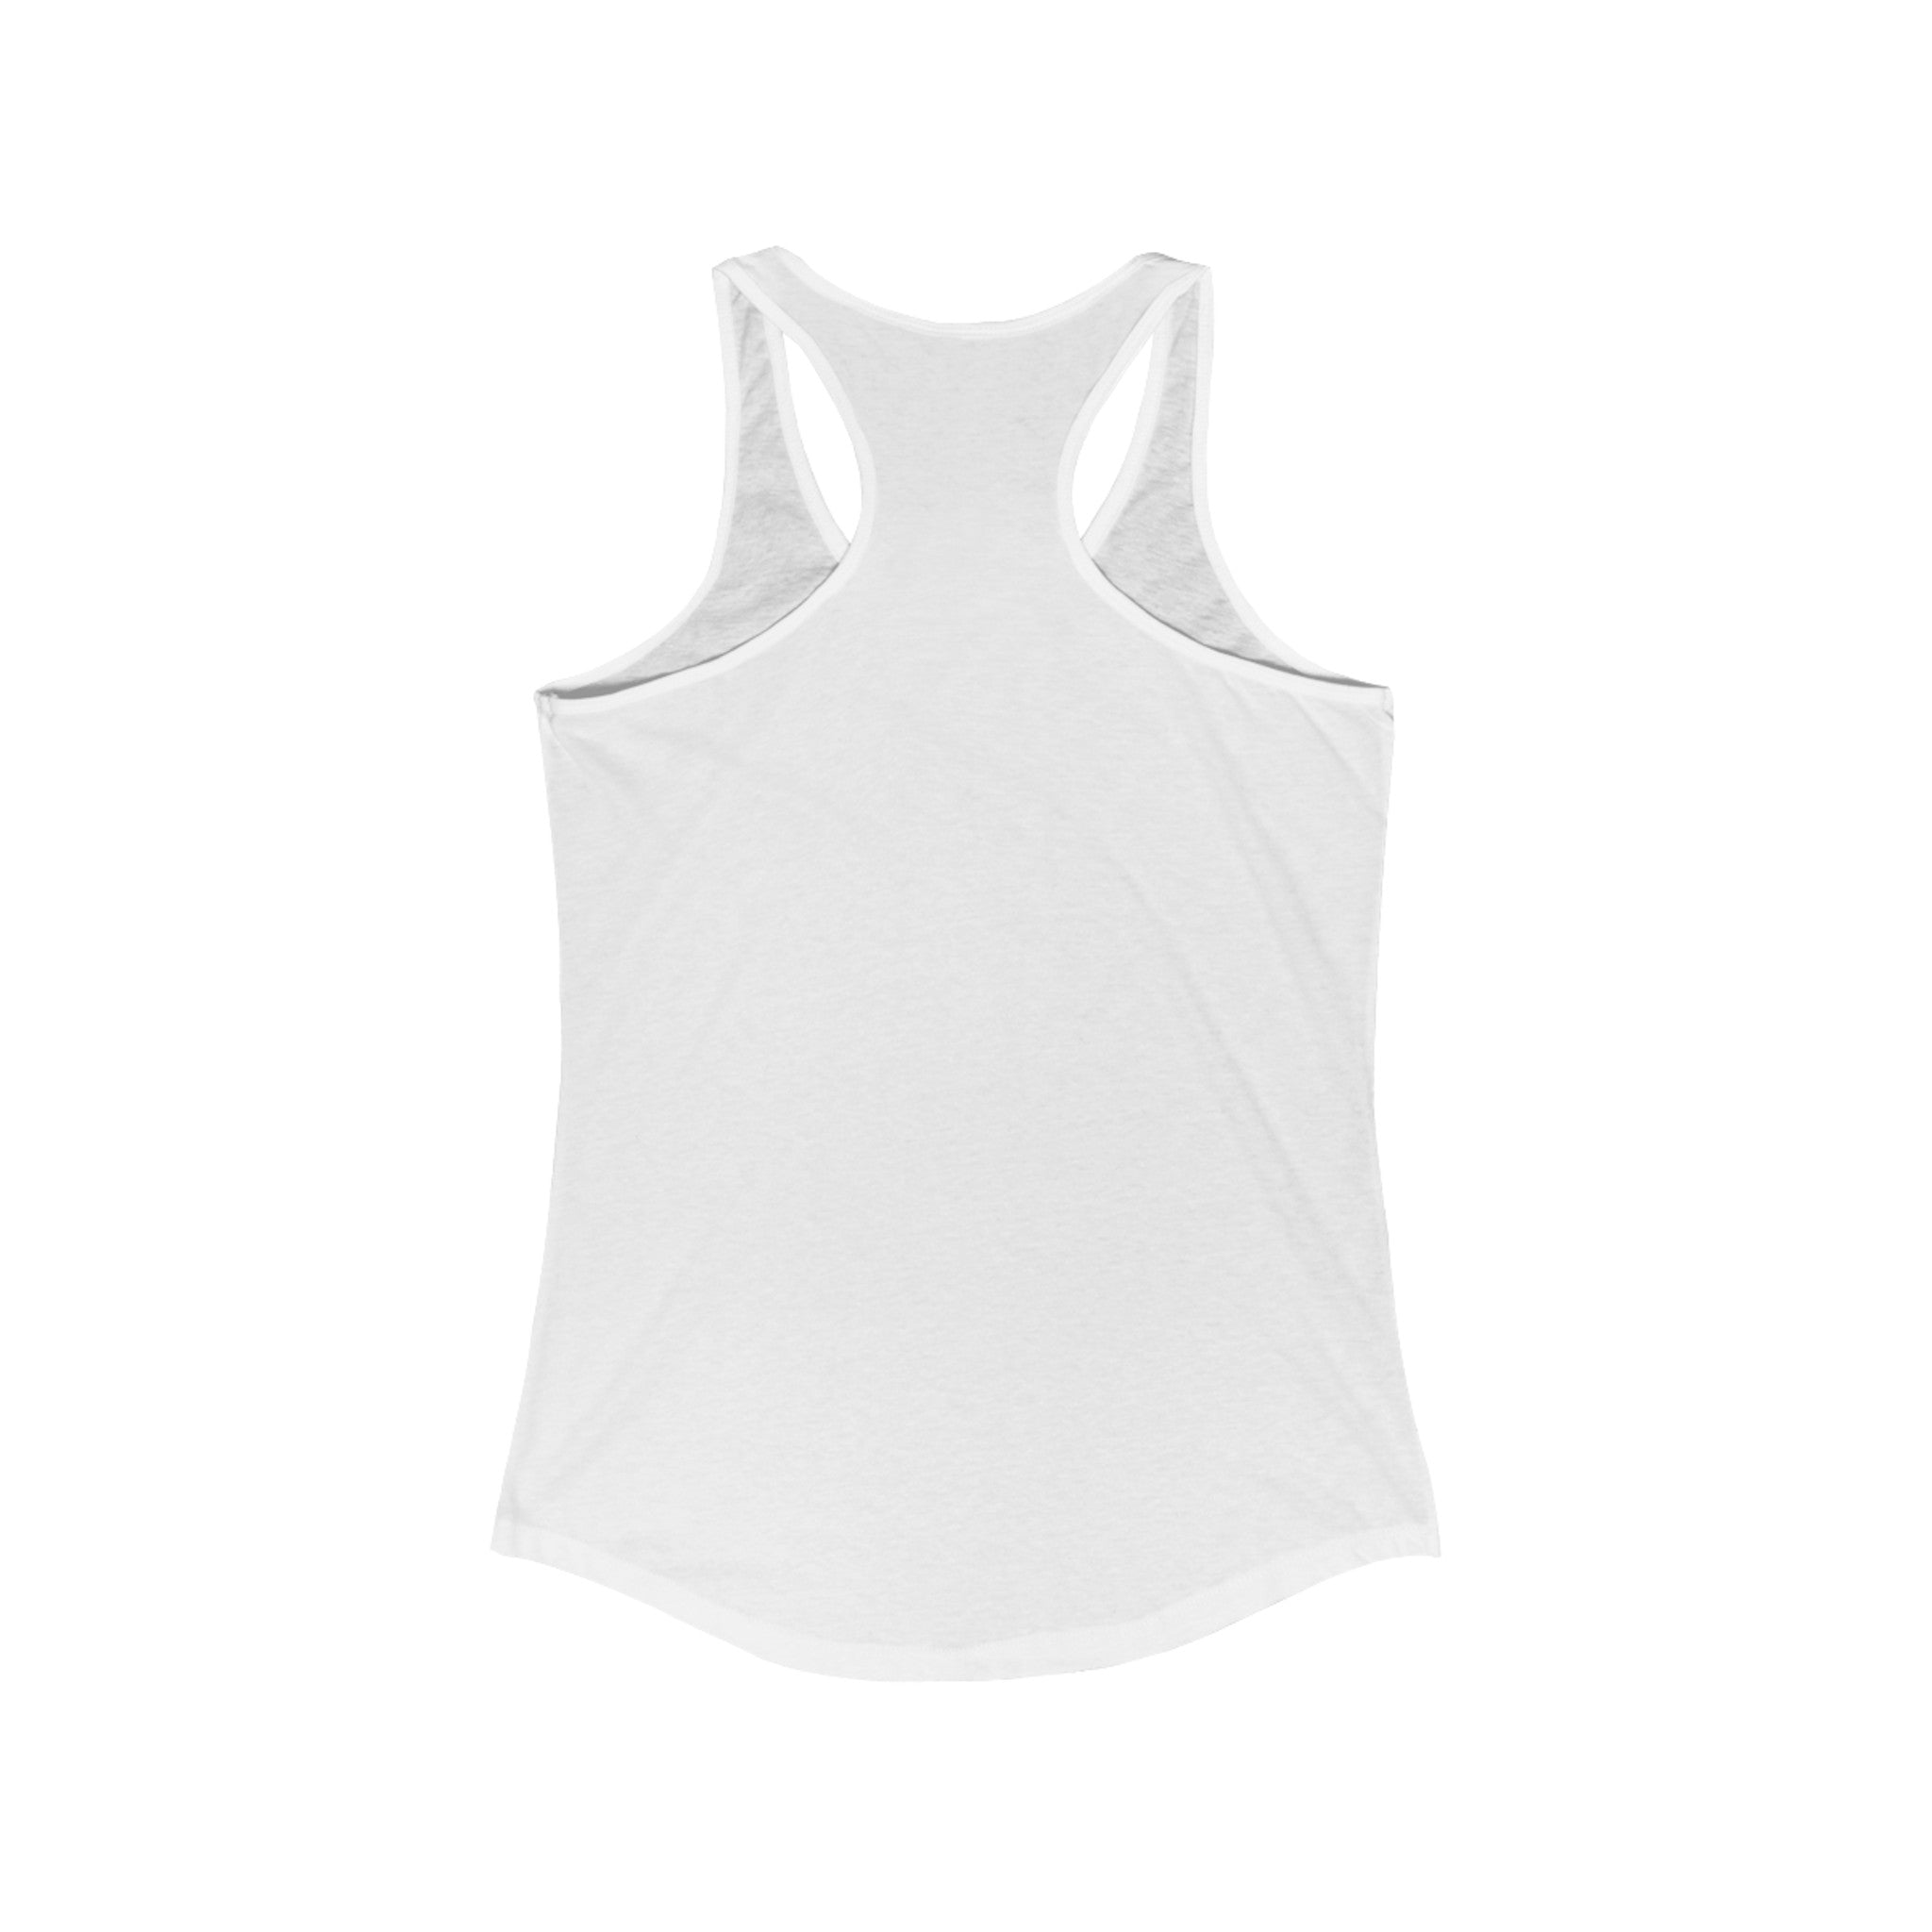 A Star Wars Easter Stormtrooper - Women's Racerback Tank, featuring a Stormtrooper design, viewed from the back.